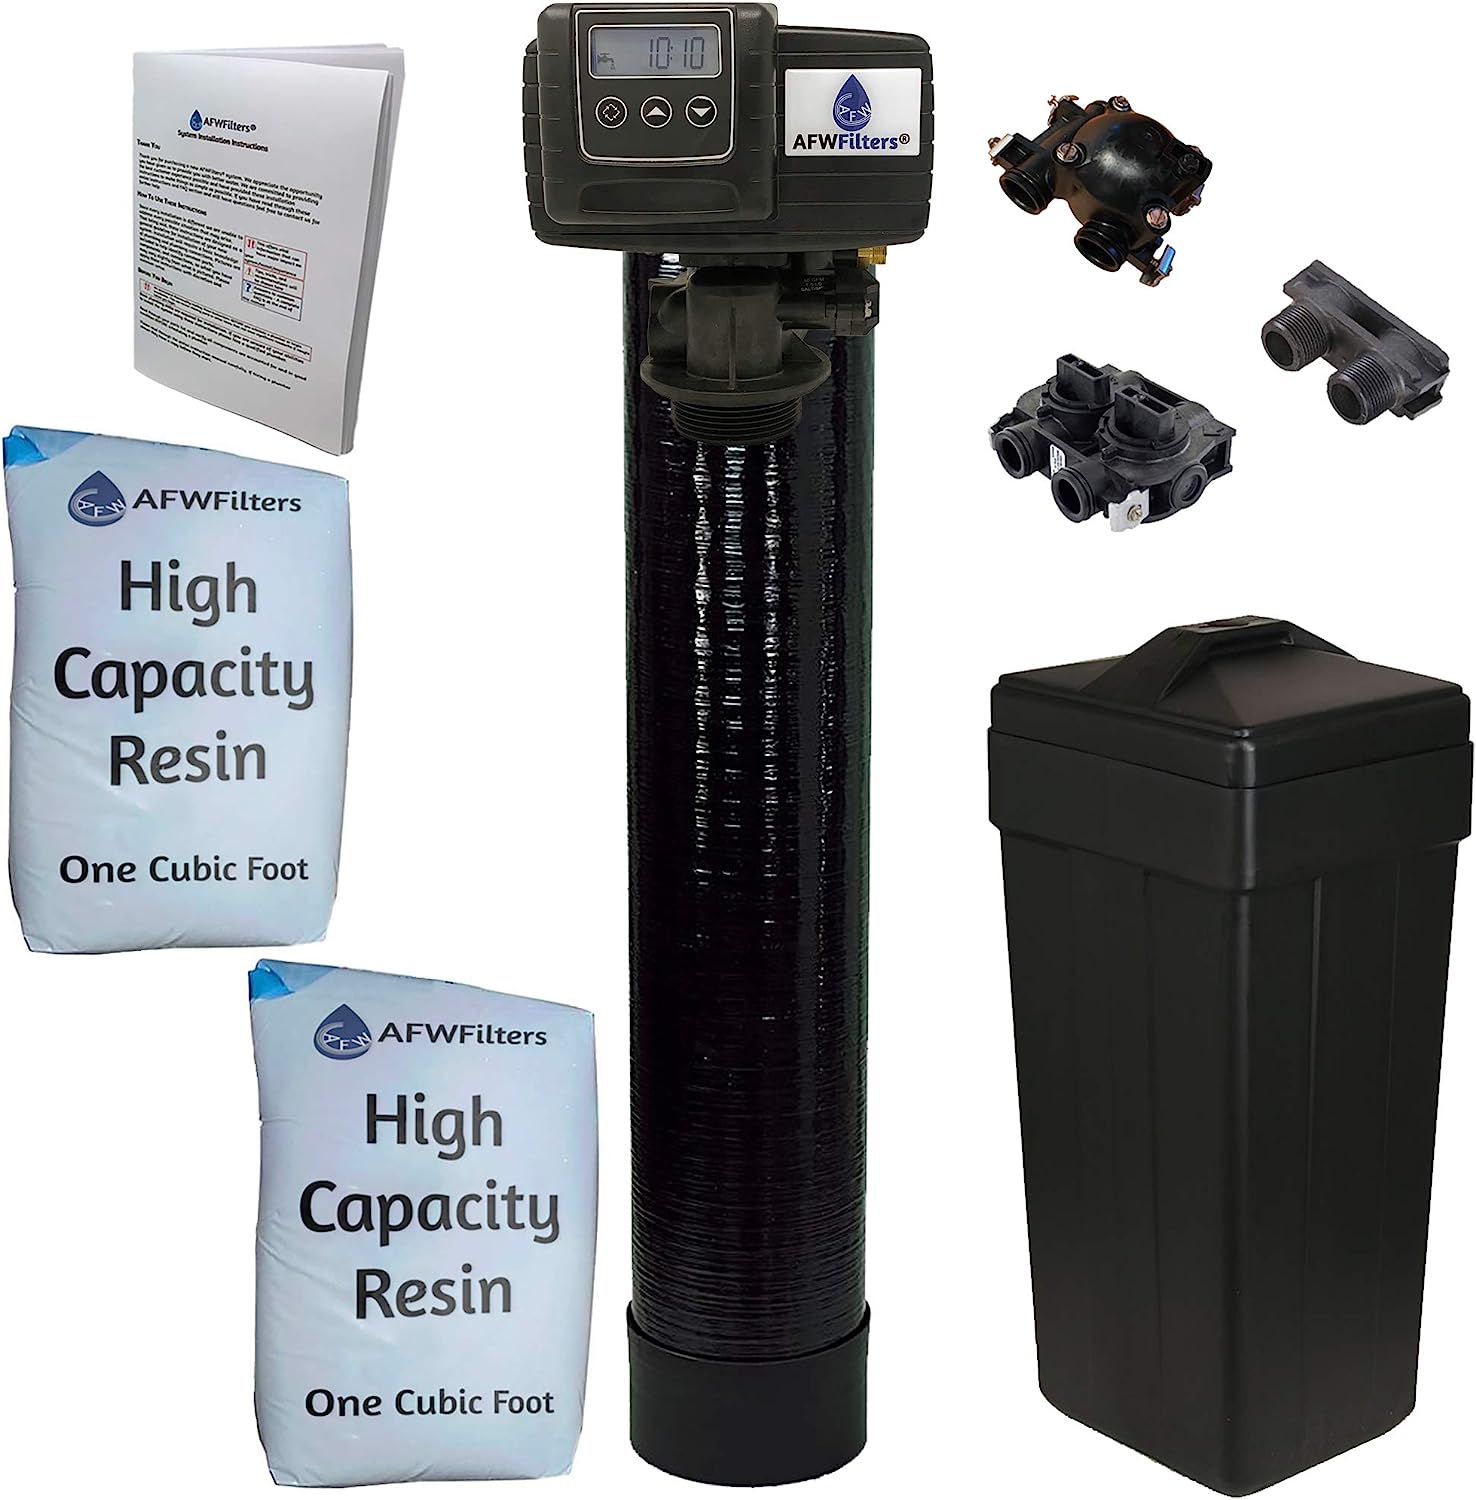 Whole House Water Softener System - Fleck 5600sxt [...]